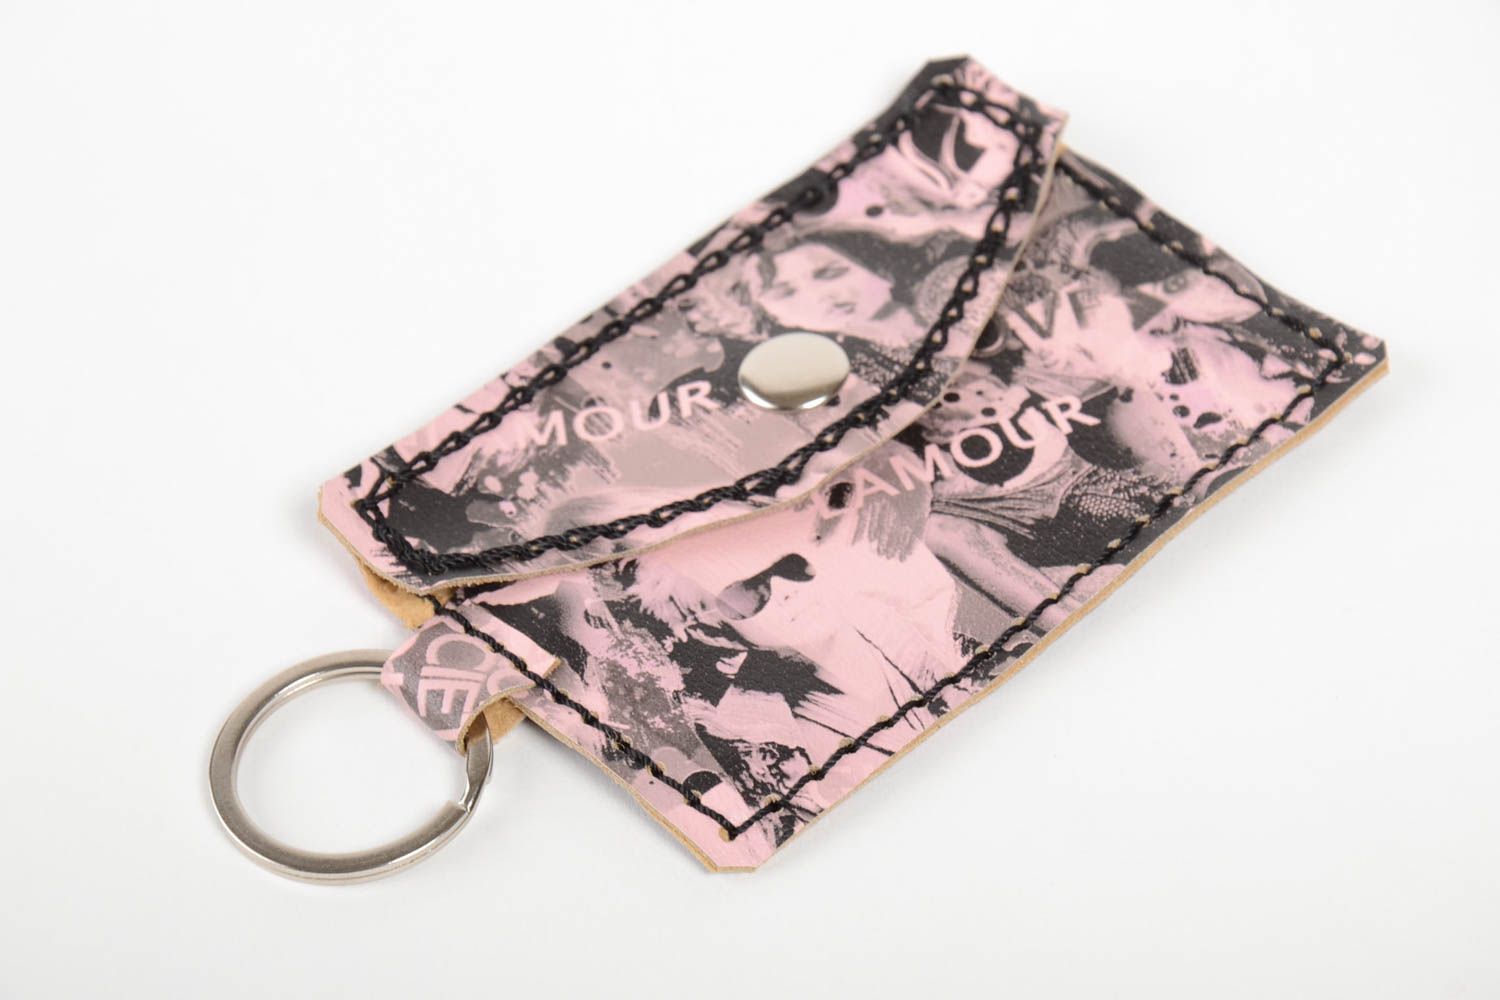 Handmade leather wallet keychain wallet leather goods women accessories photo 2